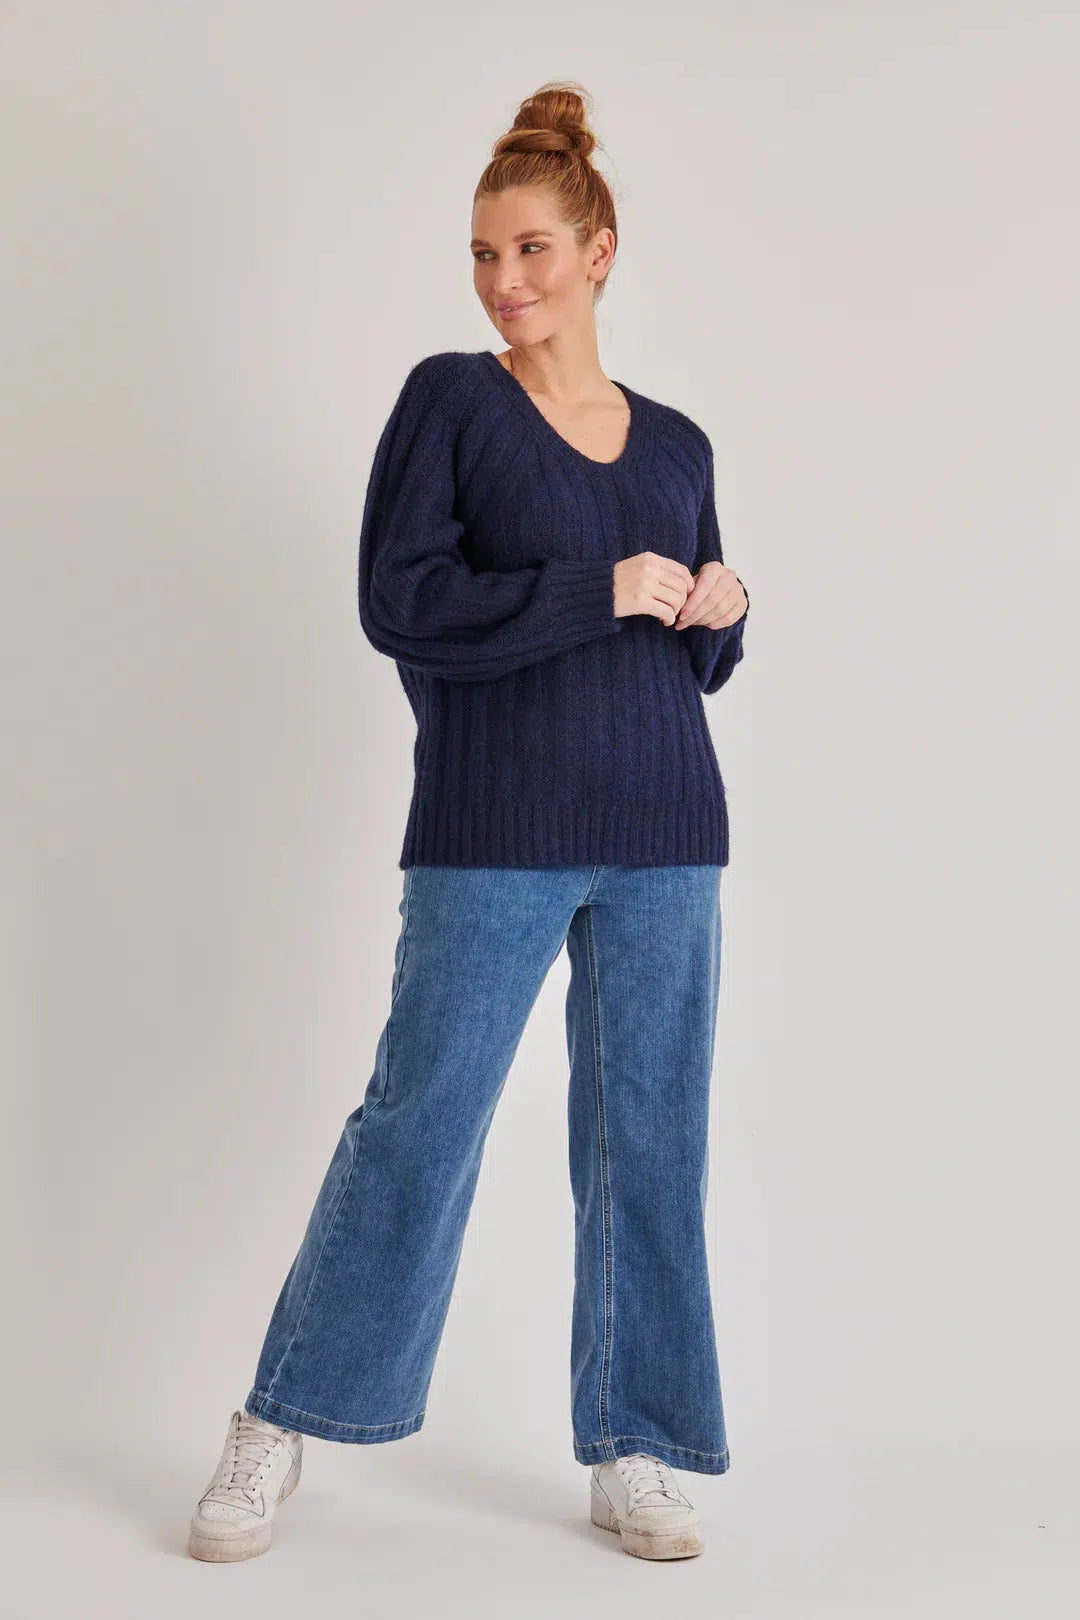 Vneck Rib Knit - Navy-One Ten Willow-Lima & Co